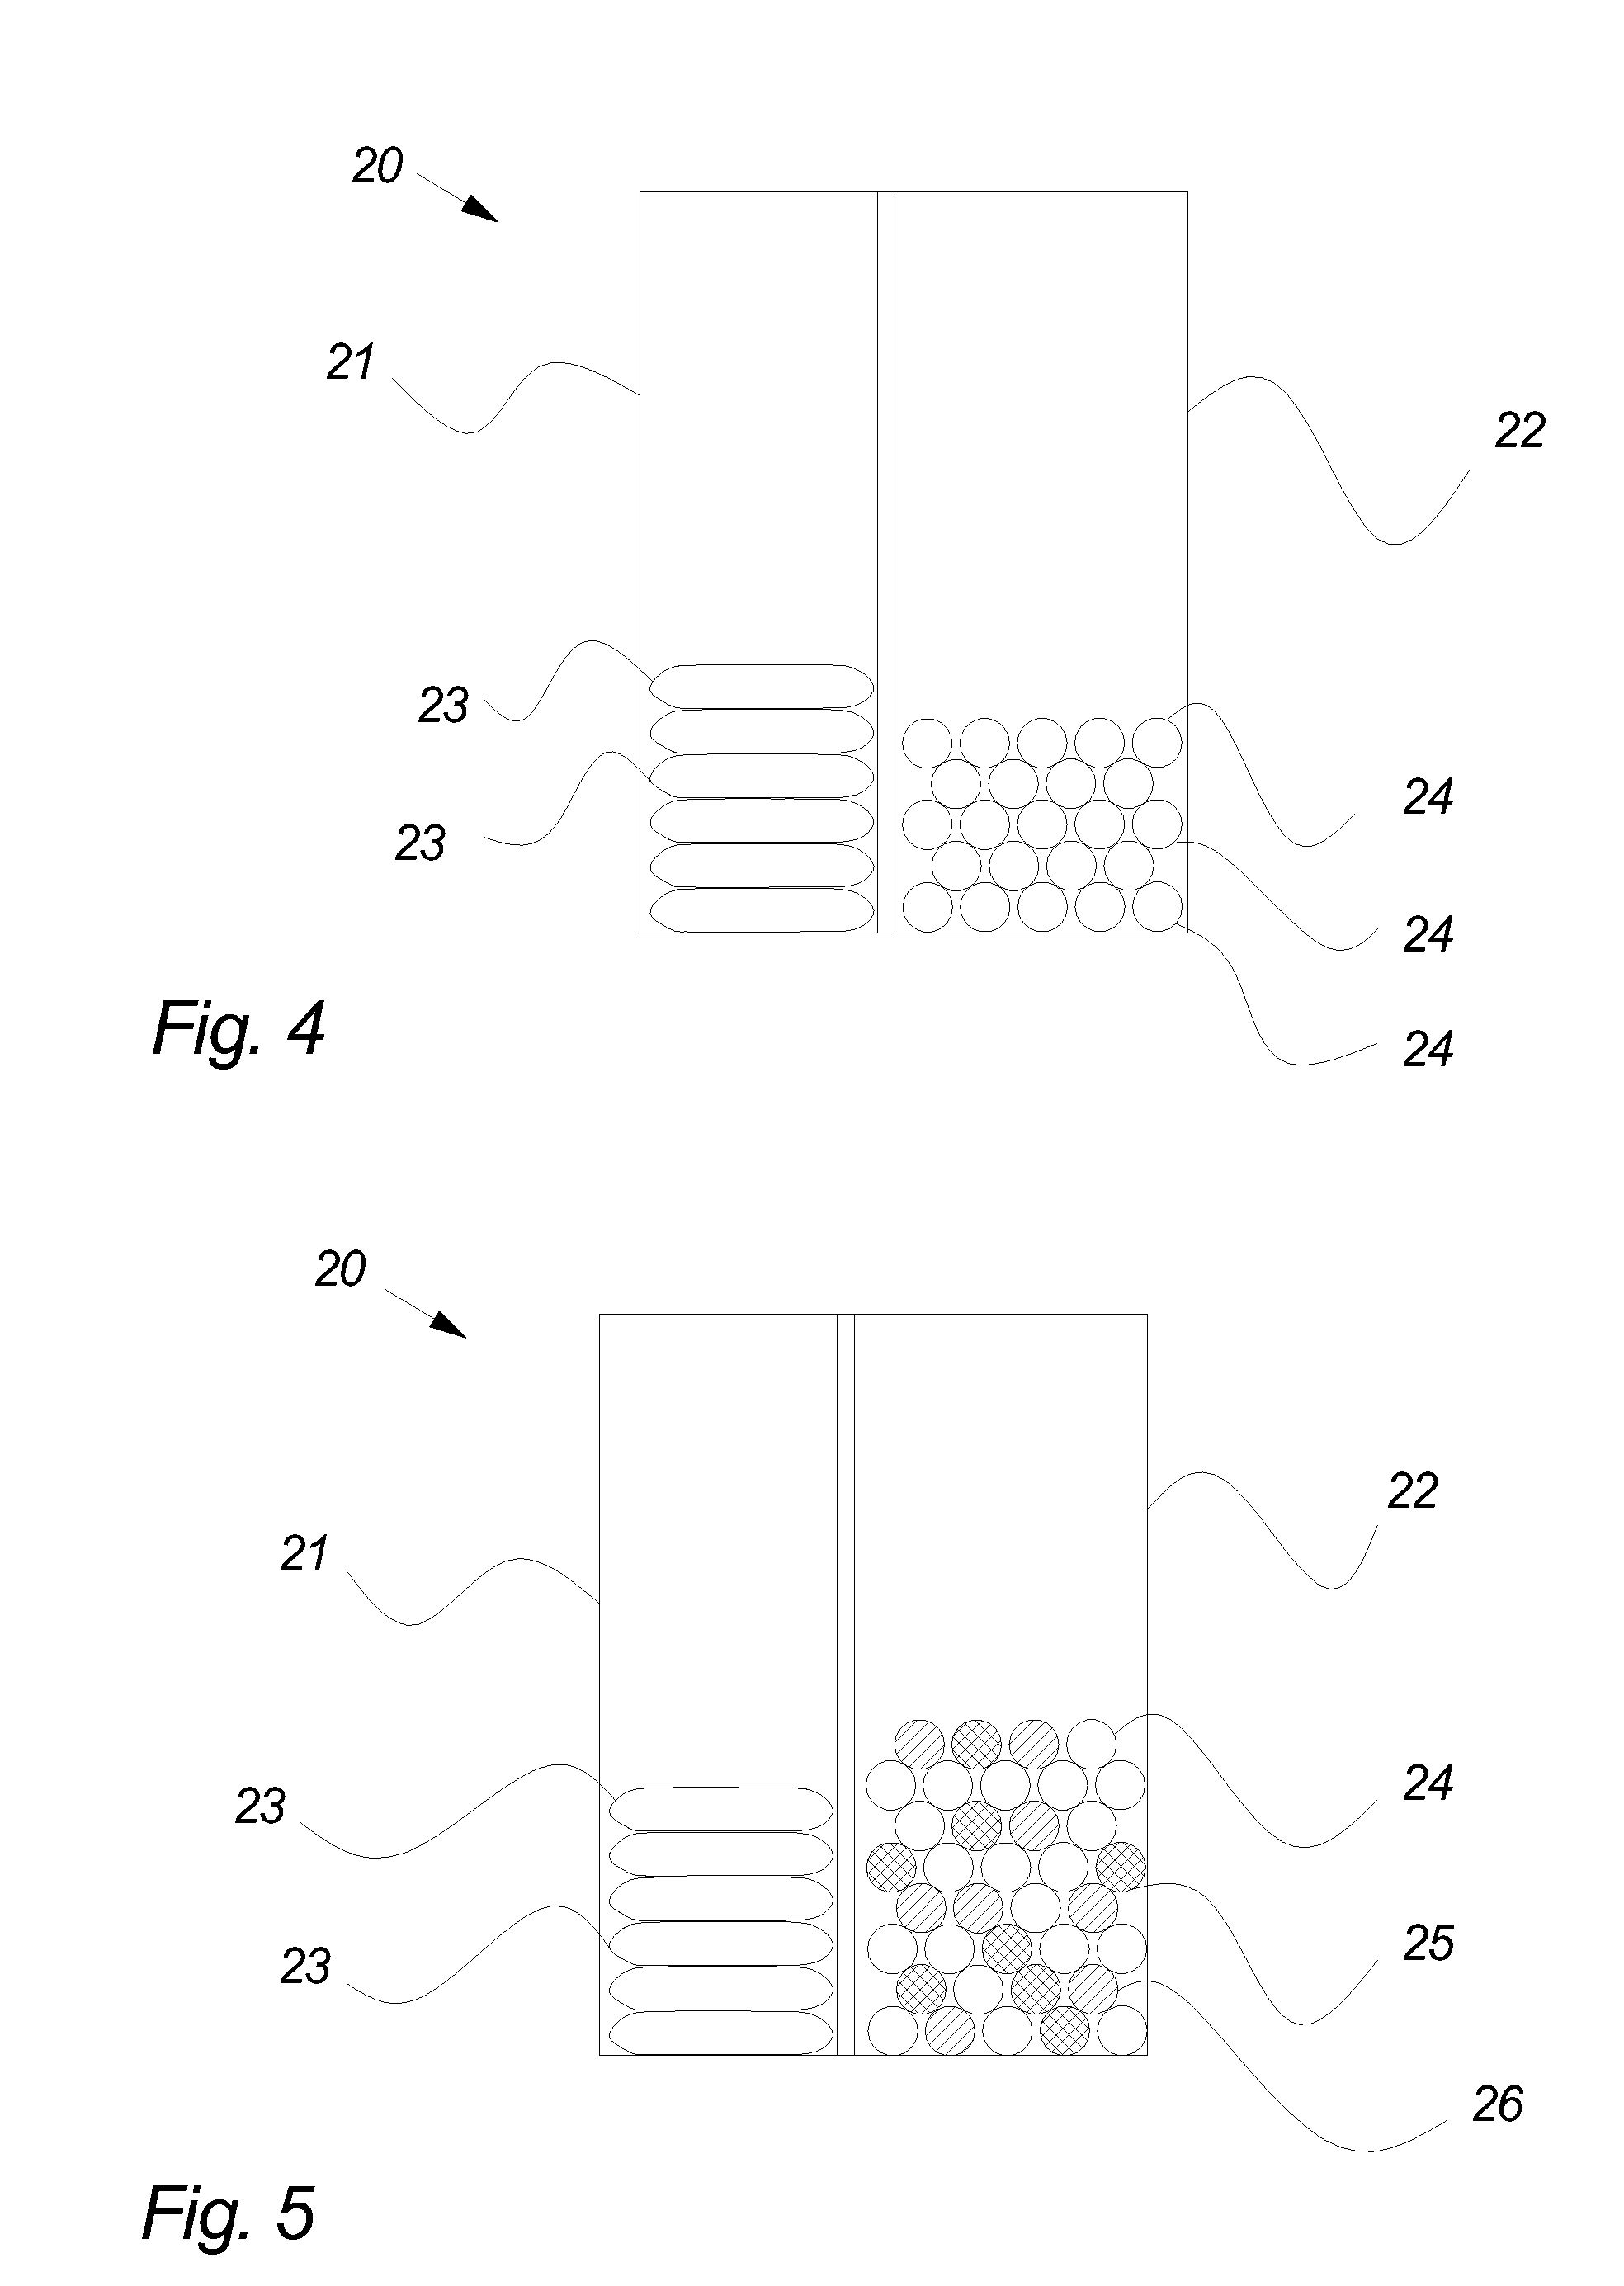 Multi-Part Kit Comprising A Chewing Gum And Further A Flavor Containing Formulation